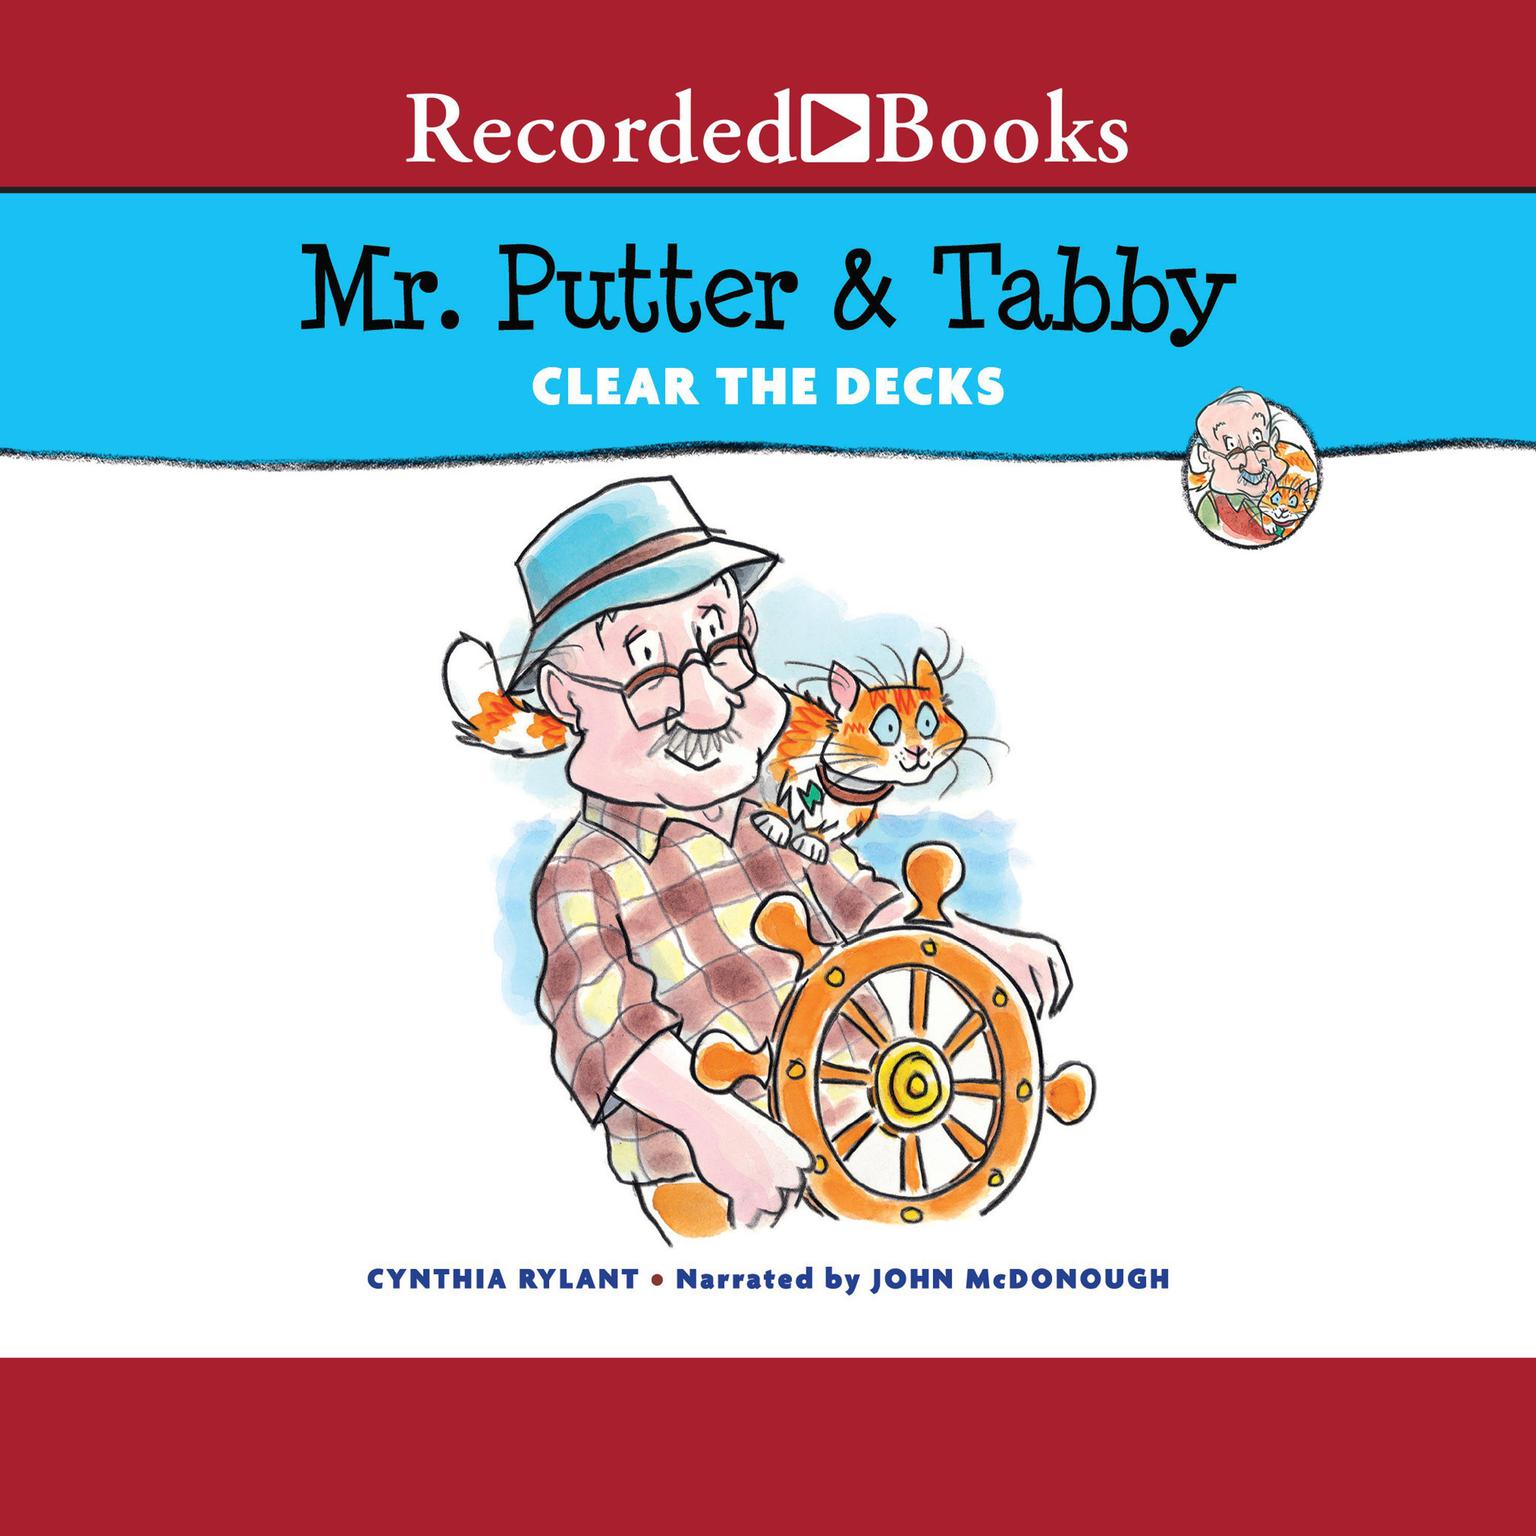 Mr. Putter & Tabby Clear the Decks Audiobook, by Cynthia Rylant